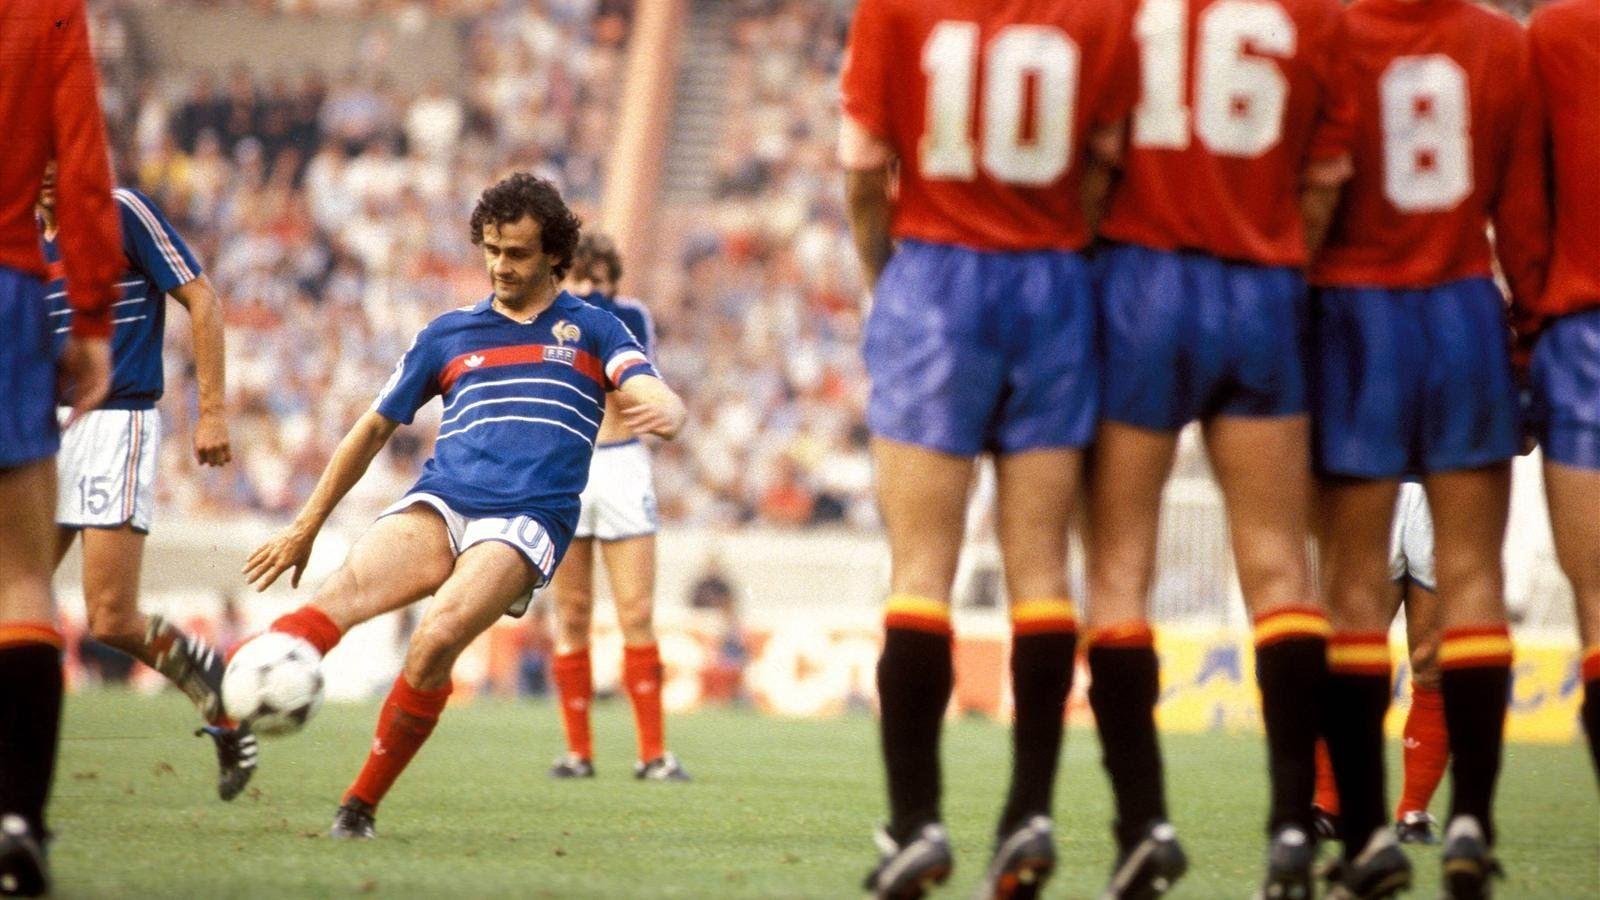 EURO 1984 Champions ▻The Most Beautiful French Team Ever?